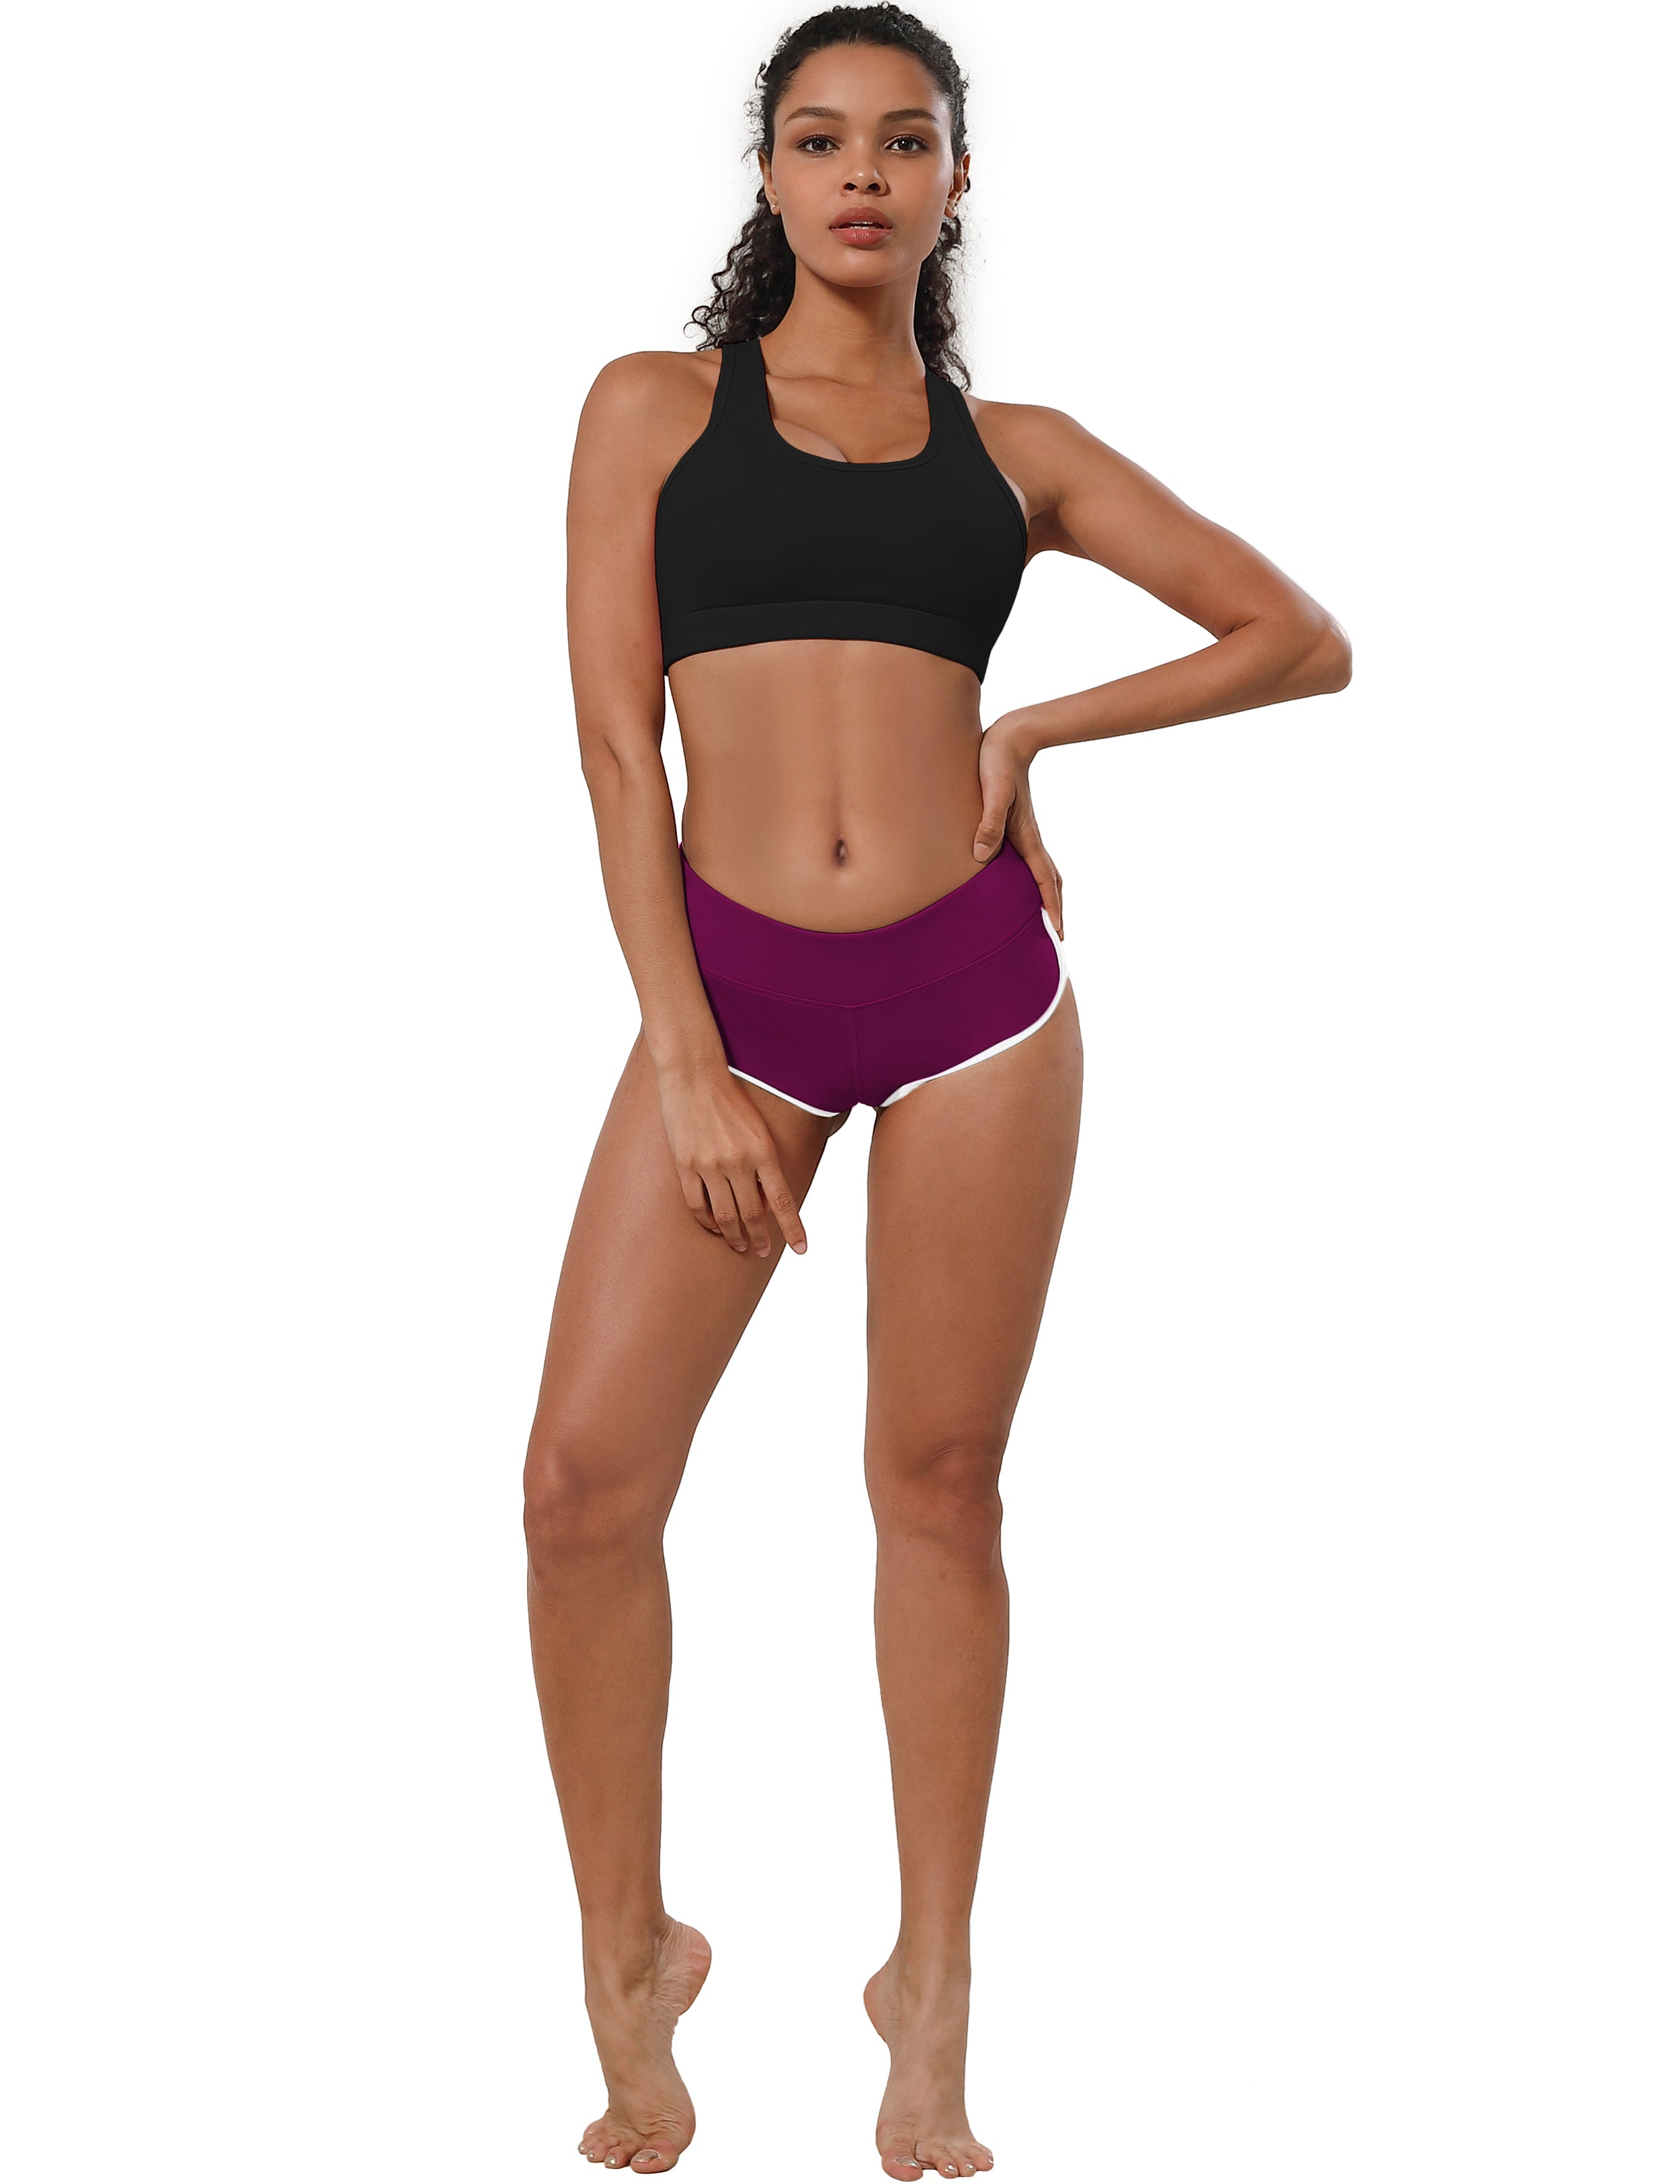 Sexy Booty Yoga Shorts grapevine Sleek, soft, smooth and totally comfortable: our newest sexy style is here. Softest-ever fabric High elasticity High density 4-way stretch Fabric doesn't attract lint easily No see-through Moisture-wicking Machine wash 75%Nylon/25%Spandex